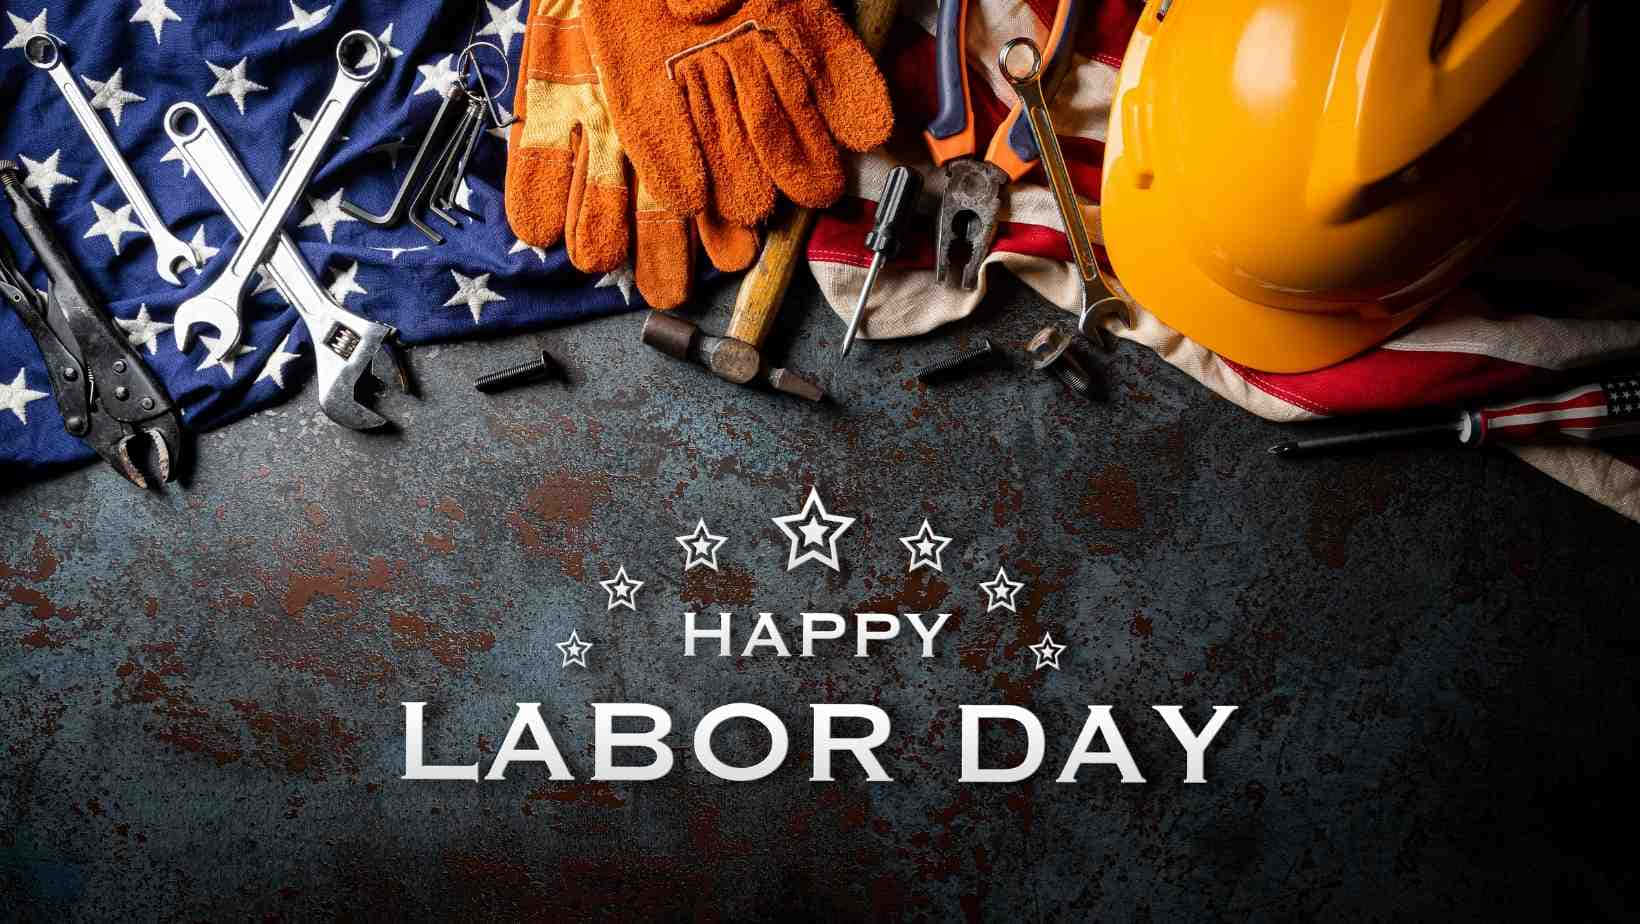 Celebrate the hard-working people this Labor Day